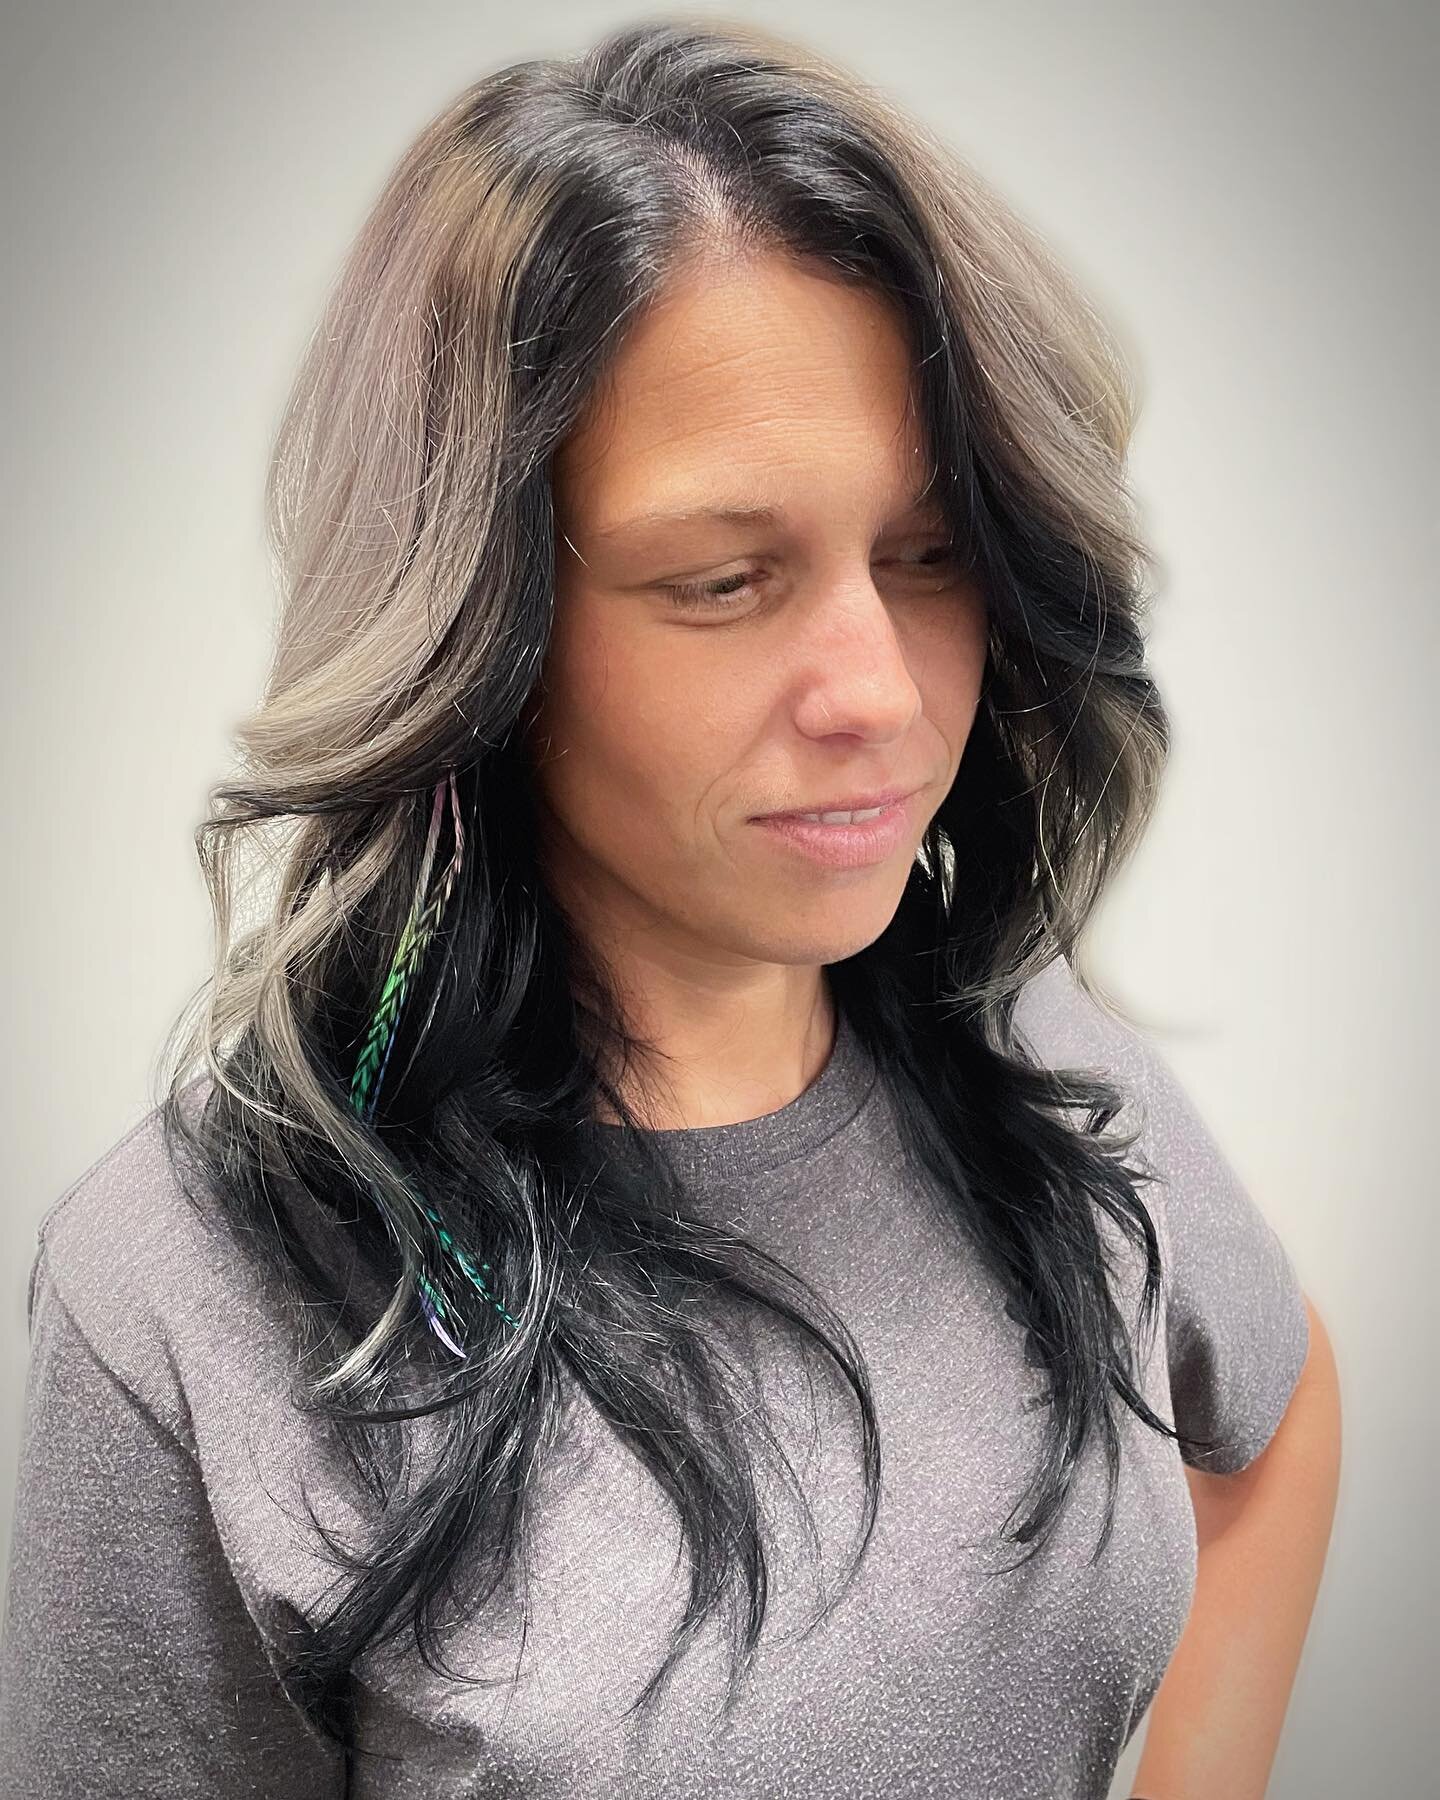 🖤🤍🖤🤍🖤🤍
Edgy, fun and gorgeous!!! What more can we say about this stunning look?  It&rsquo;s such a fun way to get the best of both worlds. 

#bestofbothworlds #blackandwhite #featherhairextensions #darksouls #longhair #healthyhairfirst #beautif